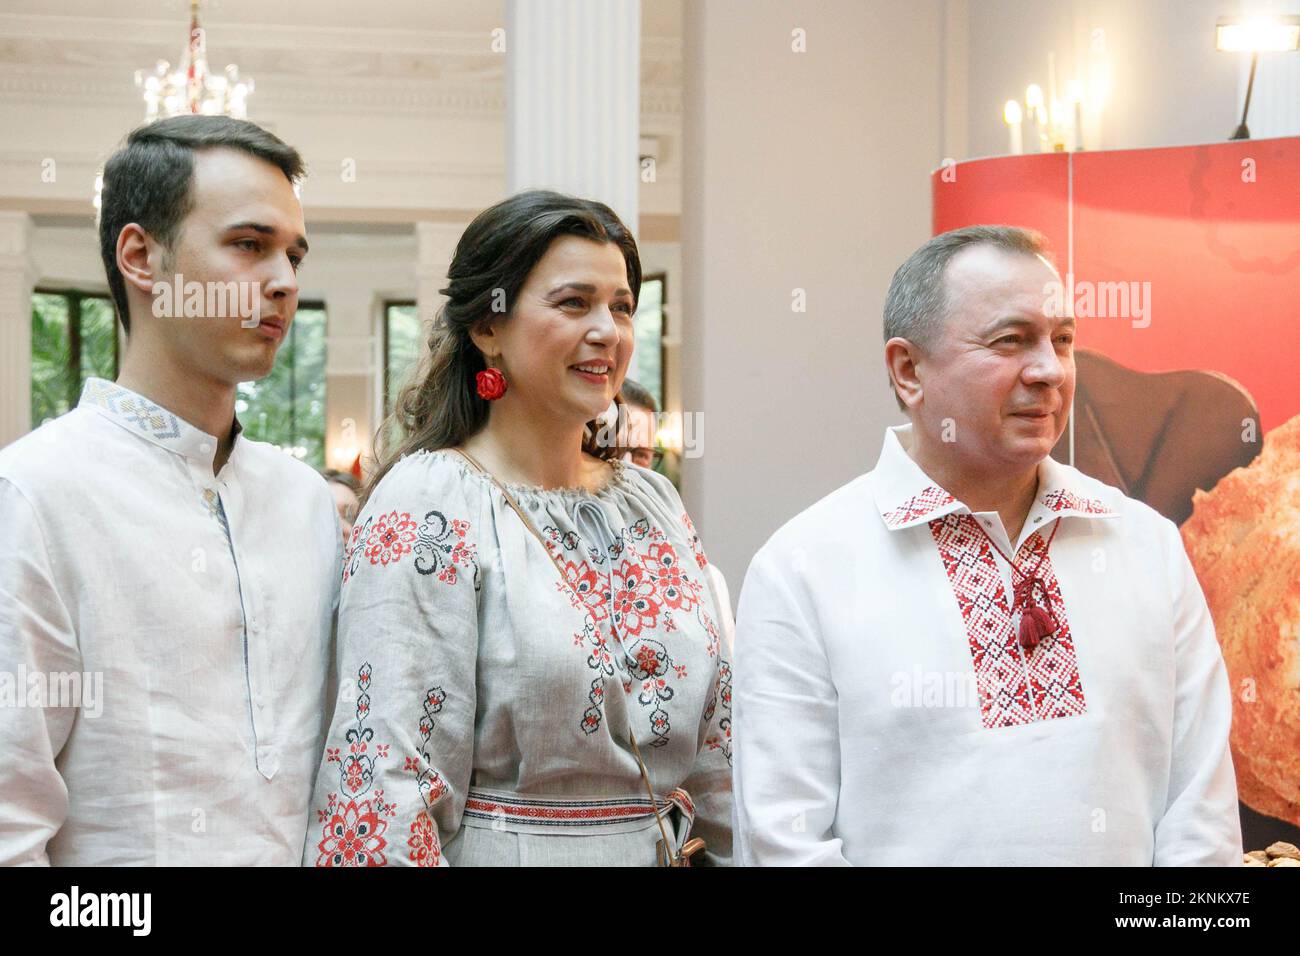 The Minister of Foreign Affairs of the Republic of Belarus Vladimir Makei (or Uladzimir Makiej) wearing vyshyvanka, a traditional Belarusian embroidered shirt smiles near her wife, actress Vera Paljakova-Makej and her son during the event called In Belarus Like At Home, organized by his Ministry for foreign diplomats. Vladimir Vladimirovich Makei (or Uladzimir Makiej) died in Minsk on November 26, 2022. He was 64 years old. There is no information that he had a chronic illness. Belarusian authorities did not state his cause of death. Makei served as the Minister of Foreign Affairs of Belarus f Stock Photo